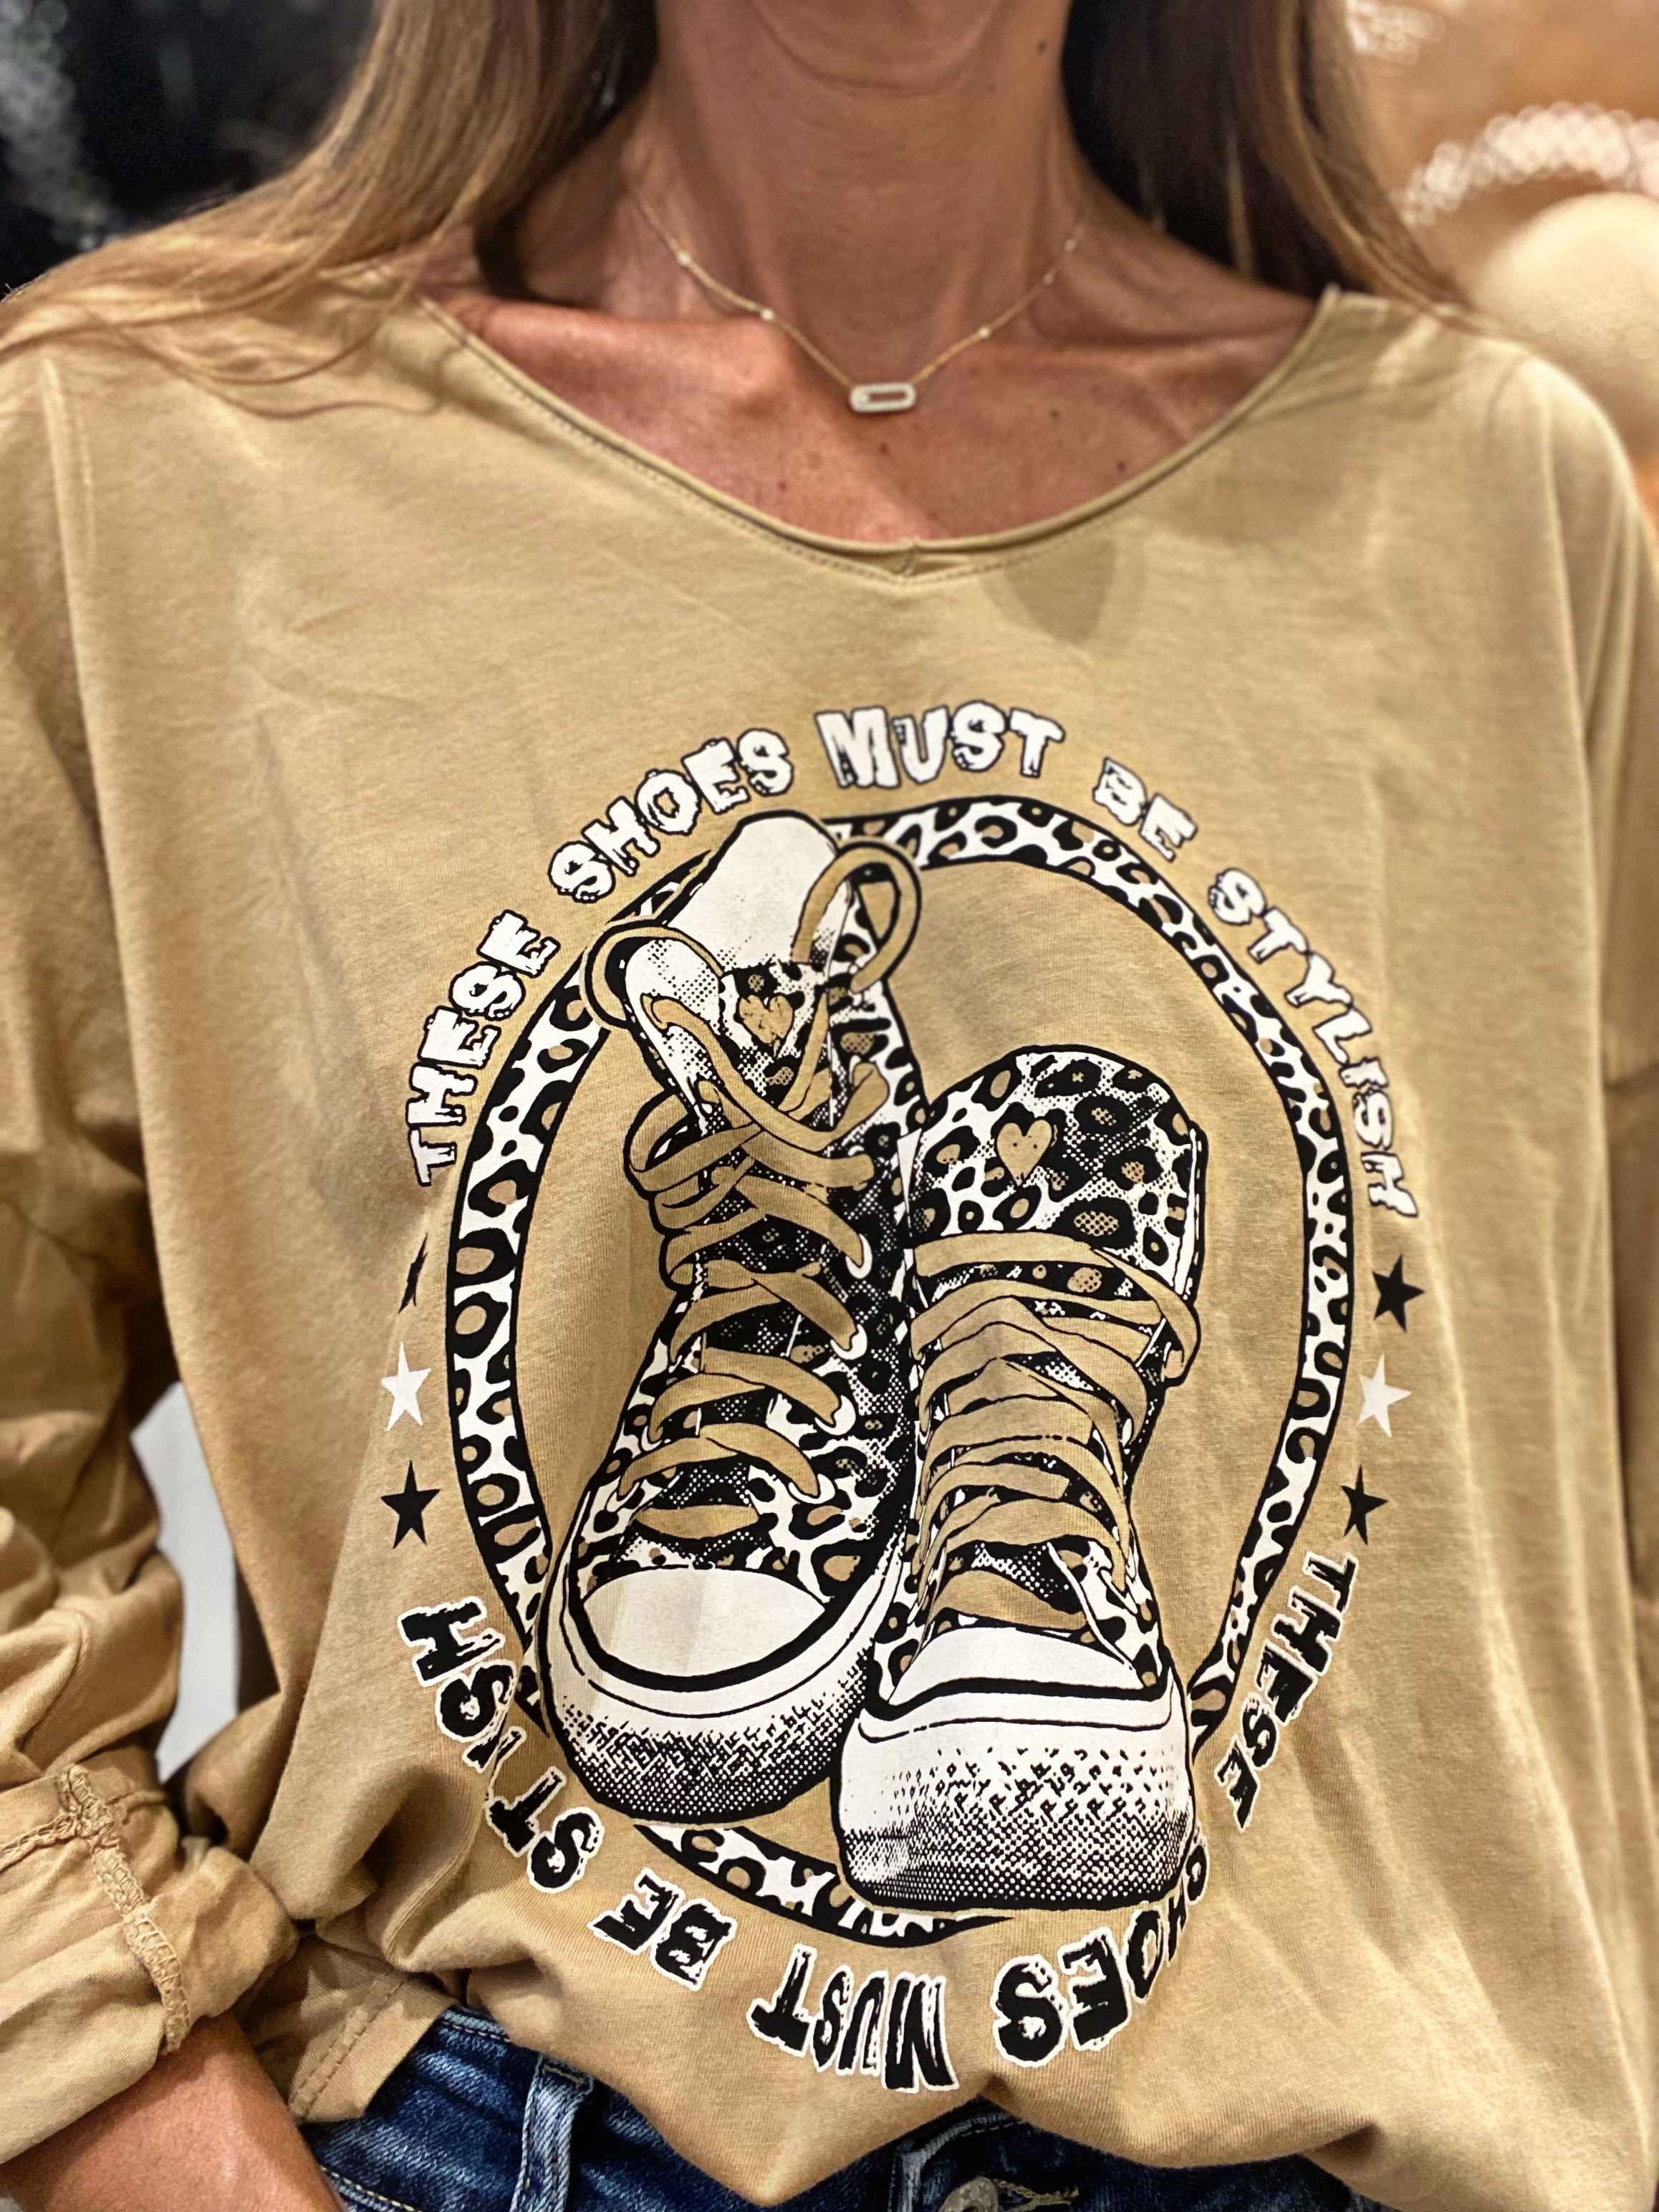 Tee shirt THESE SHOES MUST BE STYLISH Camel